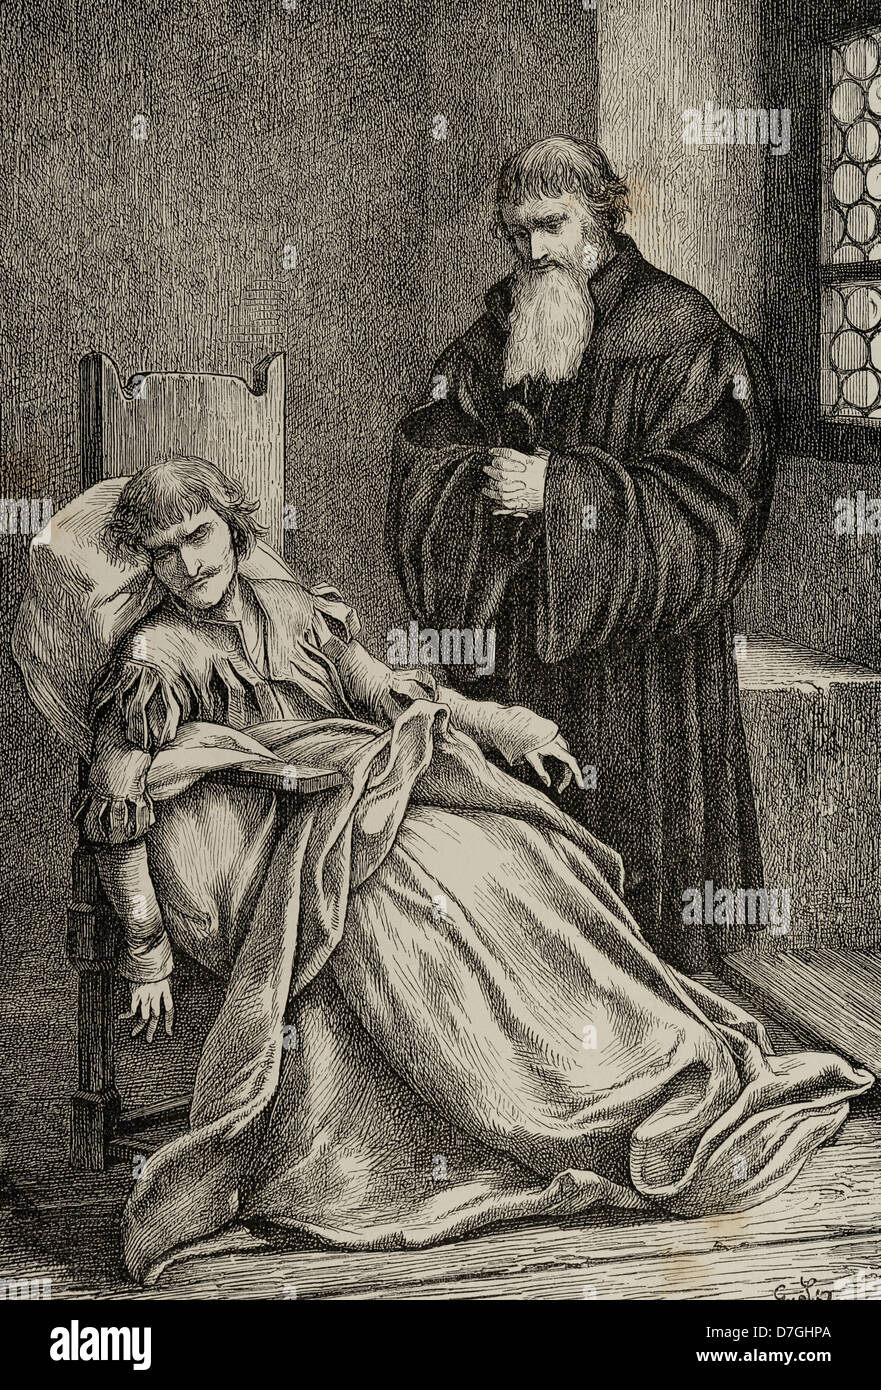 Ulrich von Hutten (1488-1523). German writer and theologian. Engraving in Germania, 1882. Stock Photo